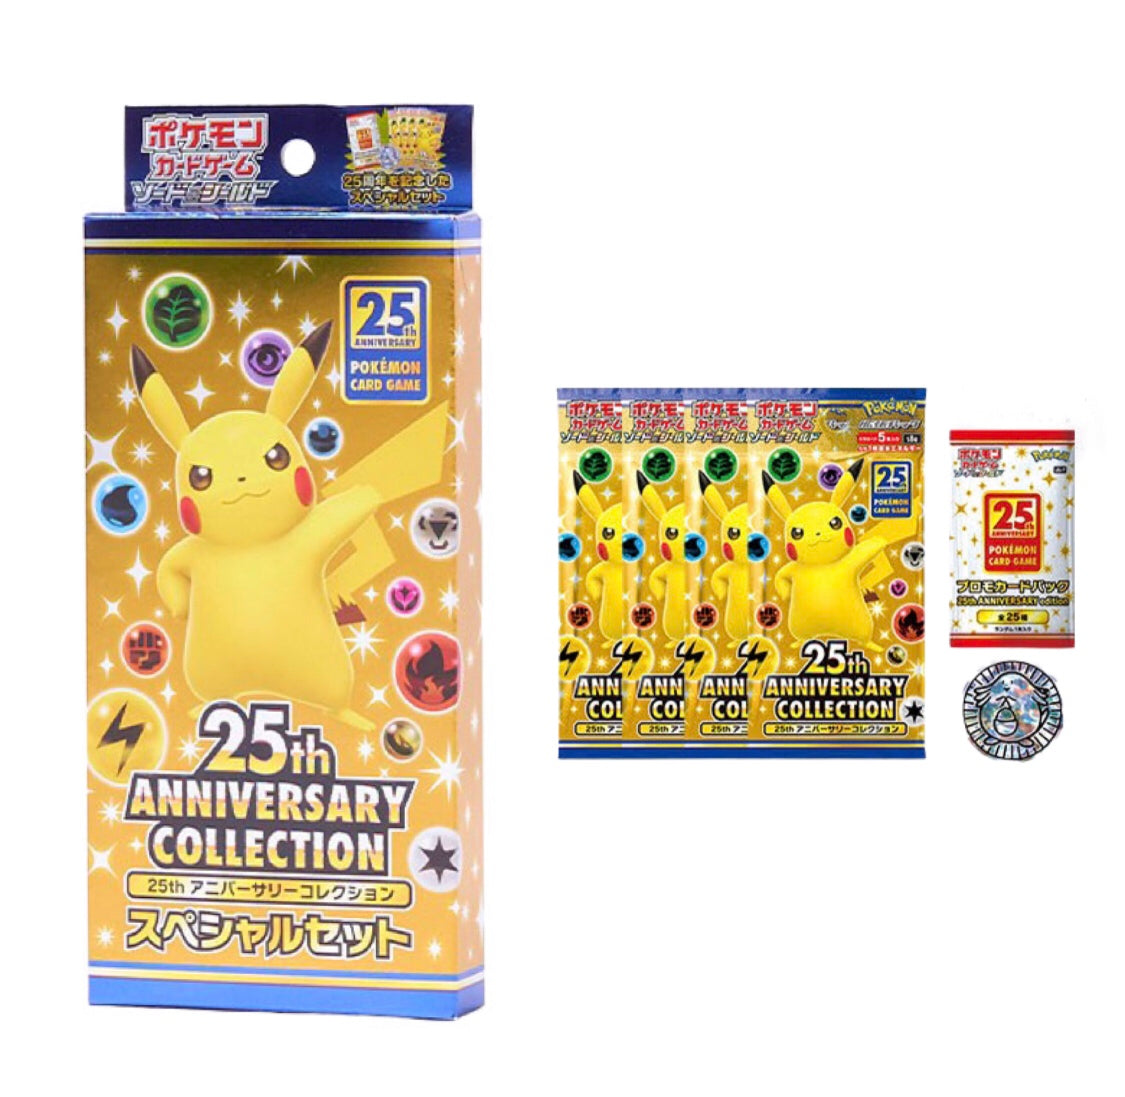 25th ANNIVERSARY COLLECTION Special Set Limited to Japanese